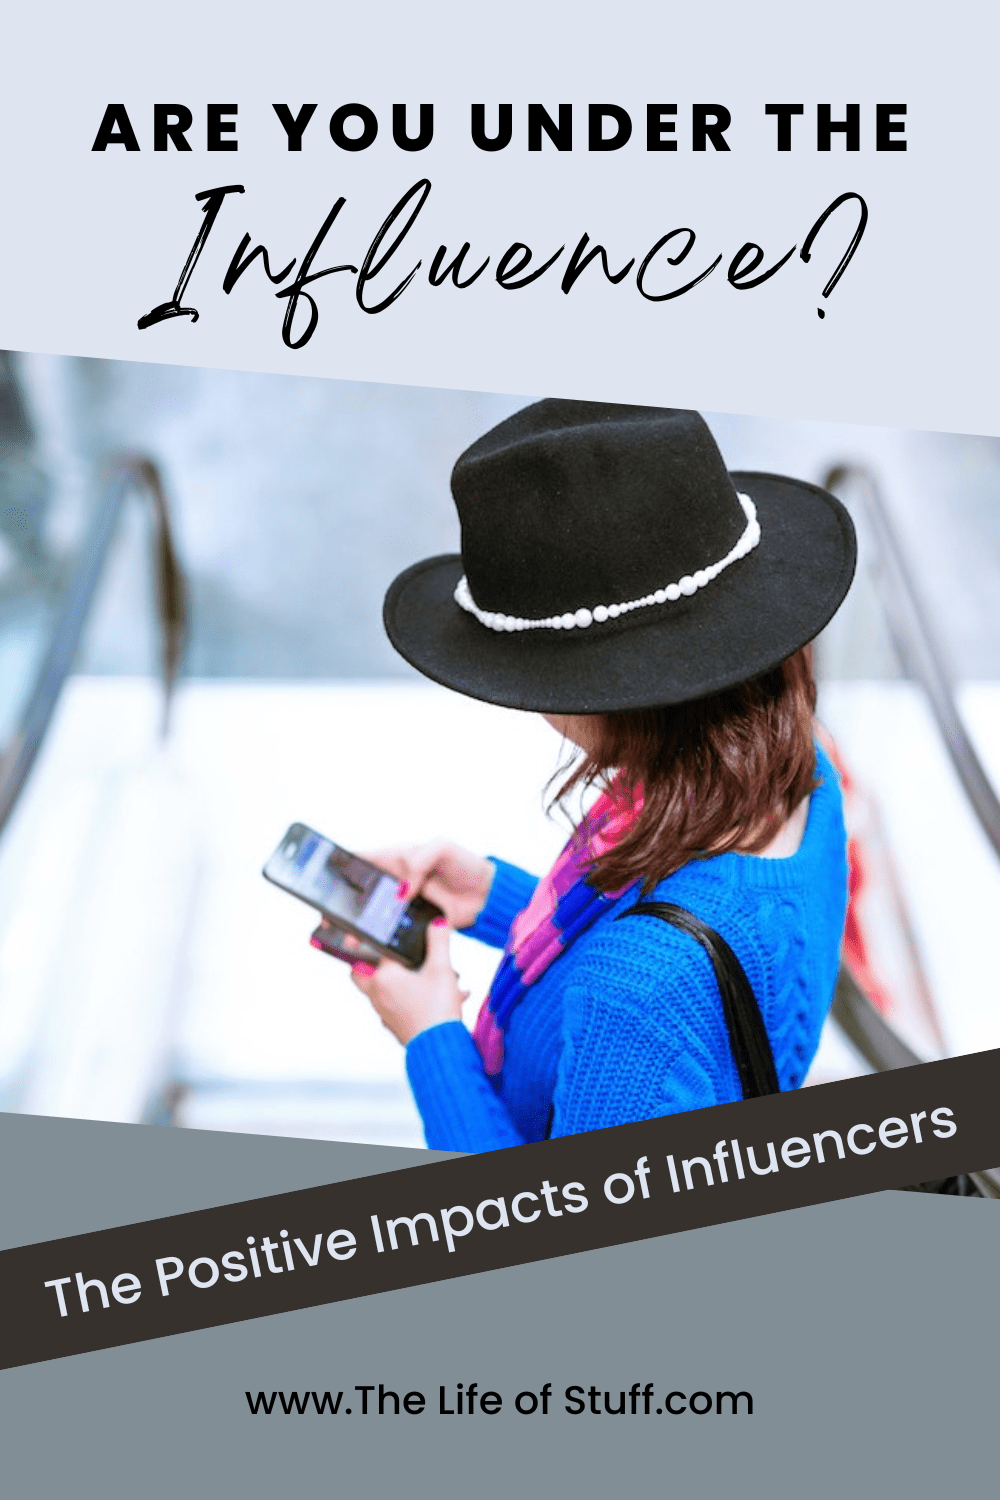 Are You Under the Influence - The Positive Impacts of Influencers - The Life of Stuff